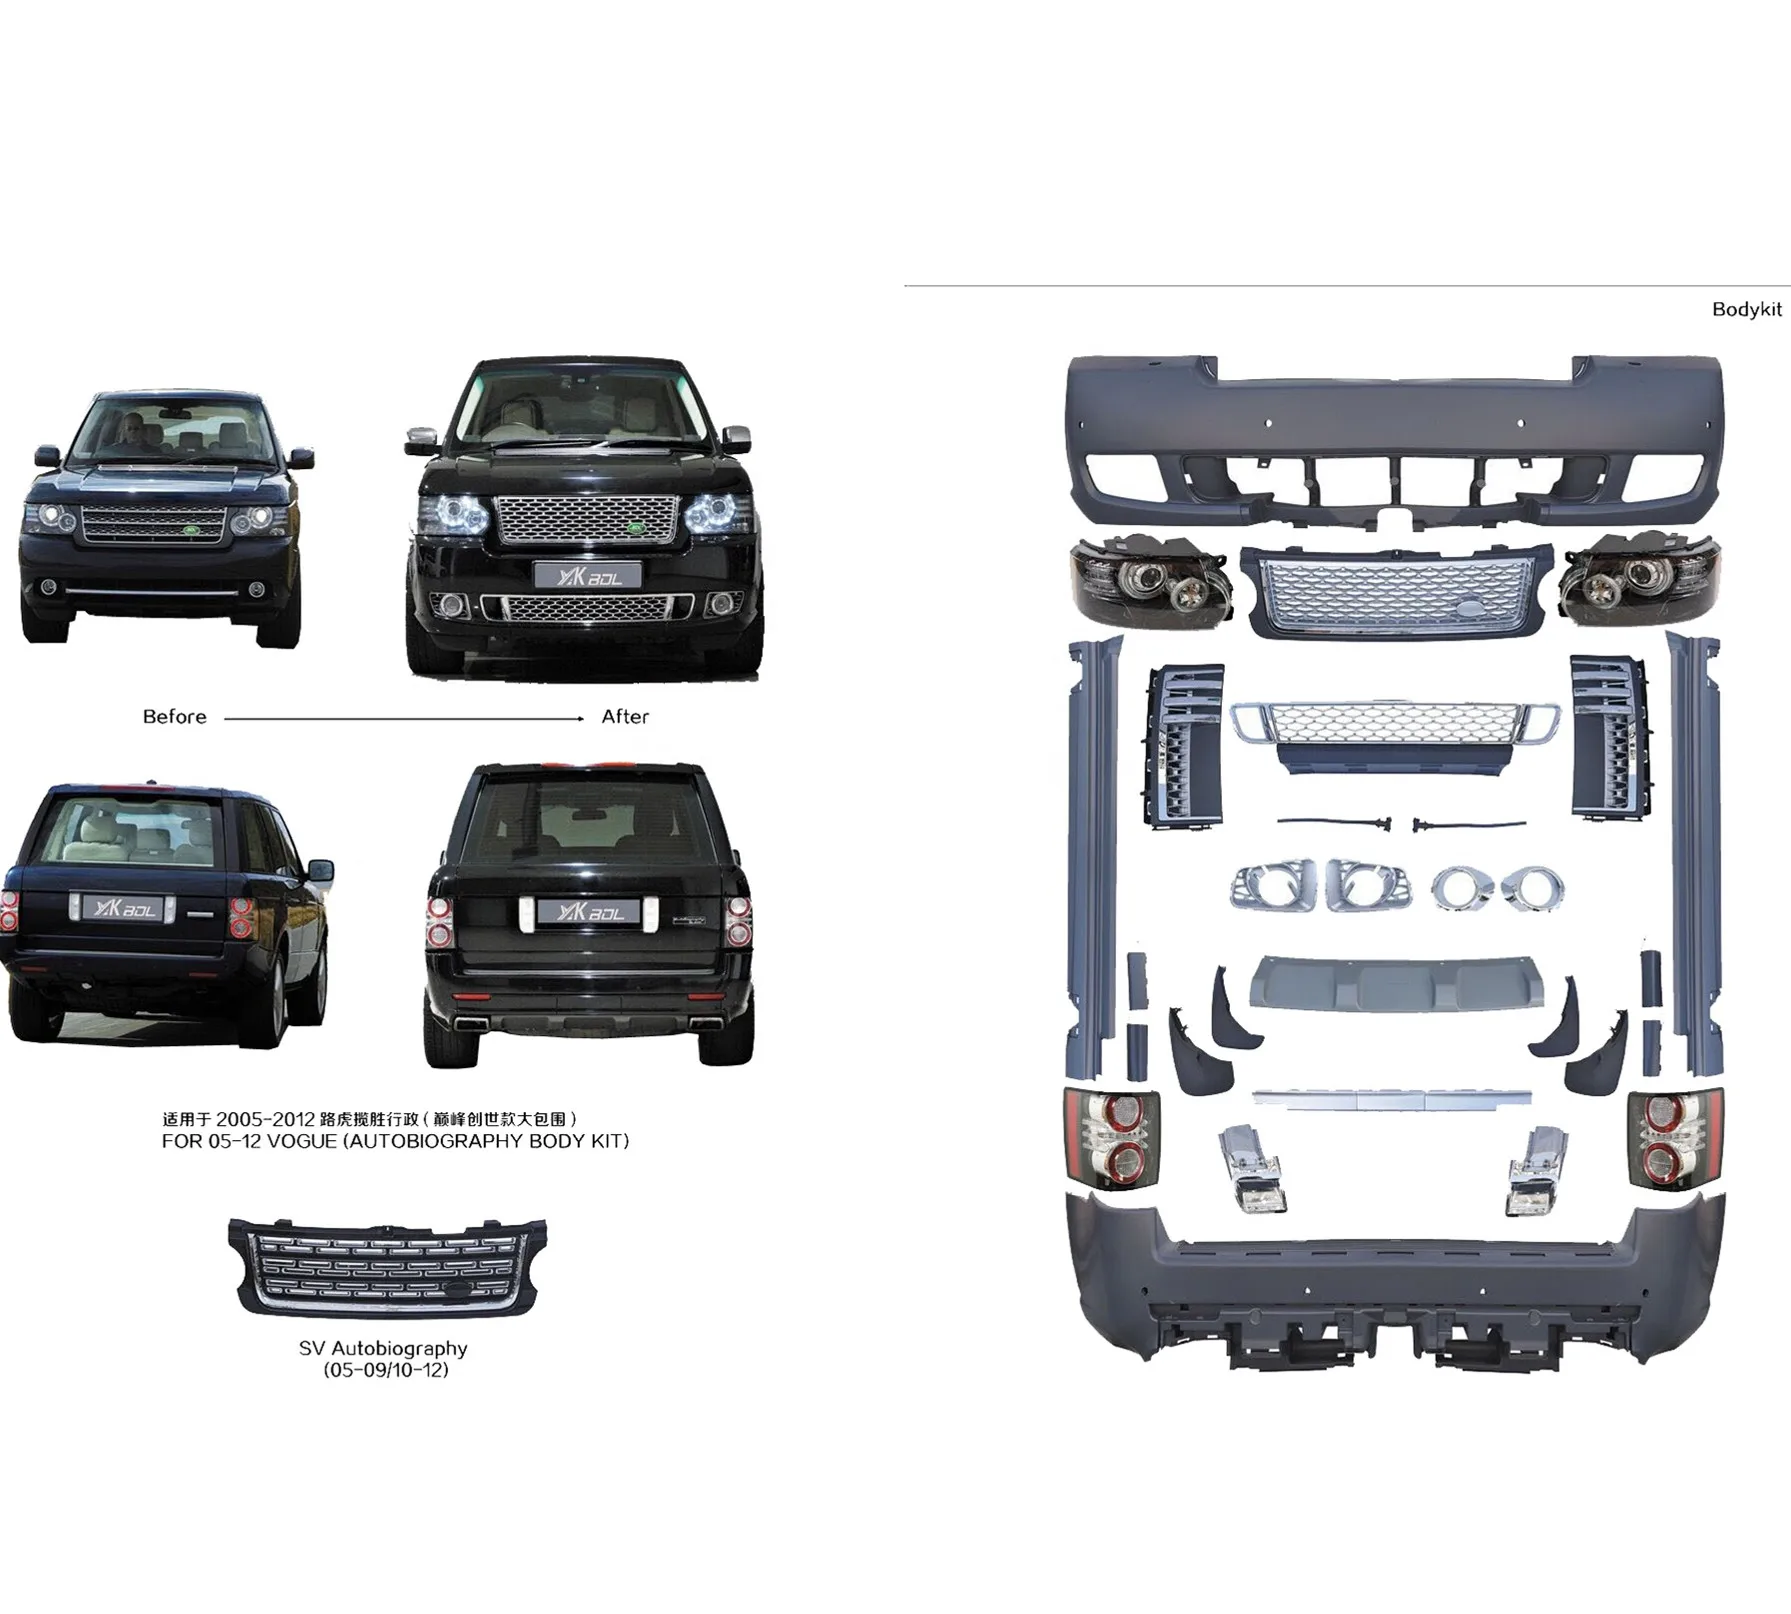 

L322 Facelift Autobiography Bodykit For Land Rover Range Rover Vogue Body Kit 2002-2009 2010 2011 2012 Auto Parts